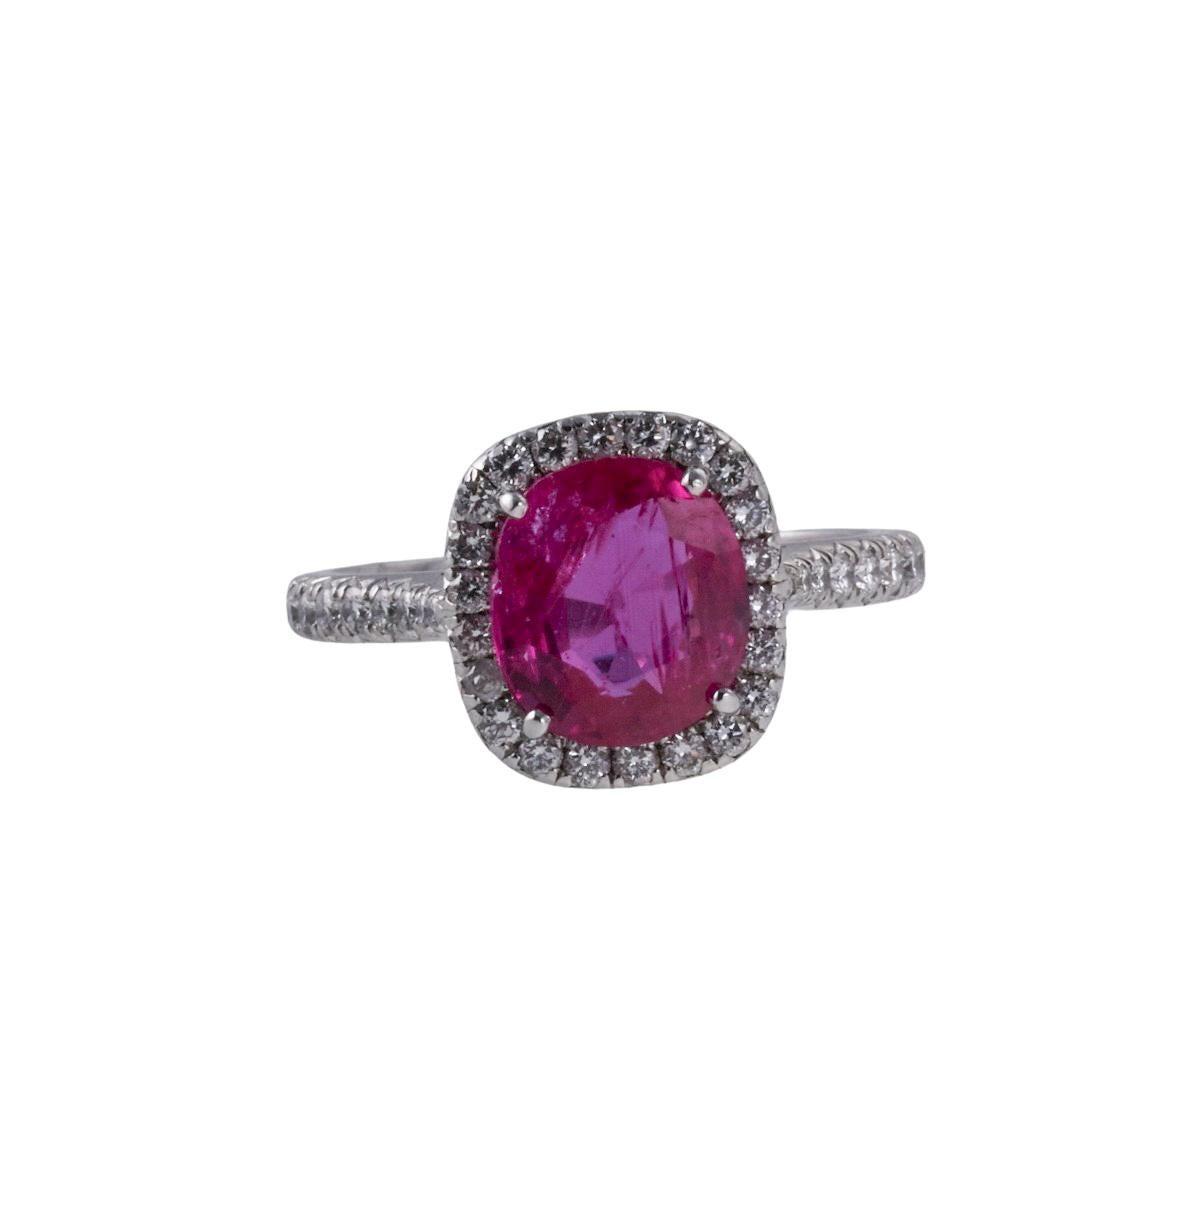 Exquisite platinum Cartier engagement ring, with center C. Dunaigre of Switzerland certified 2.30ct no heat Burma sapphire - stone measuring approx. 8.80 x 7.90 x 3.45mm. Ring size 6.5, top is 11.5 x 11mm. Setting is accented with approx. 0.40ctw